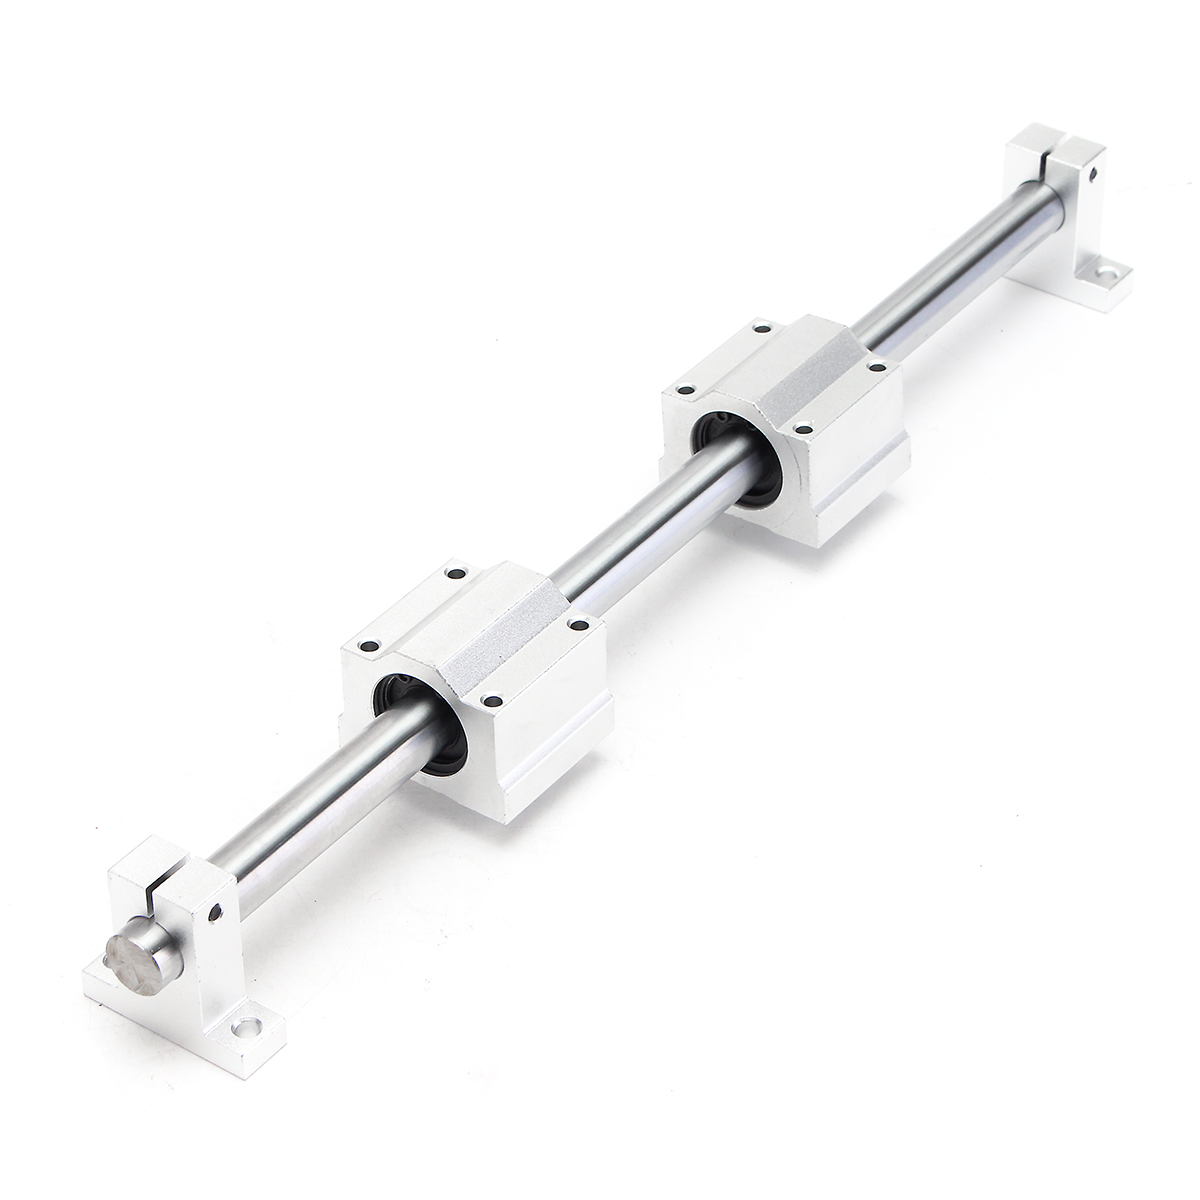 Machifit-16mm-x-1000mm-Linear-Rail-Shaft-With-Bearing-Block-and-Guide-Support-For-CNC-Parts-1390357-10